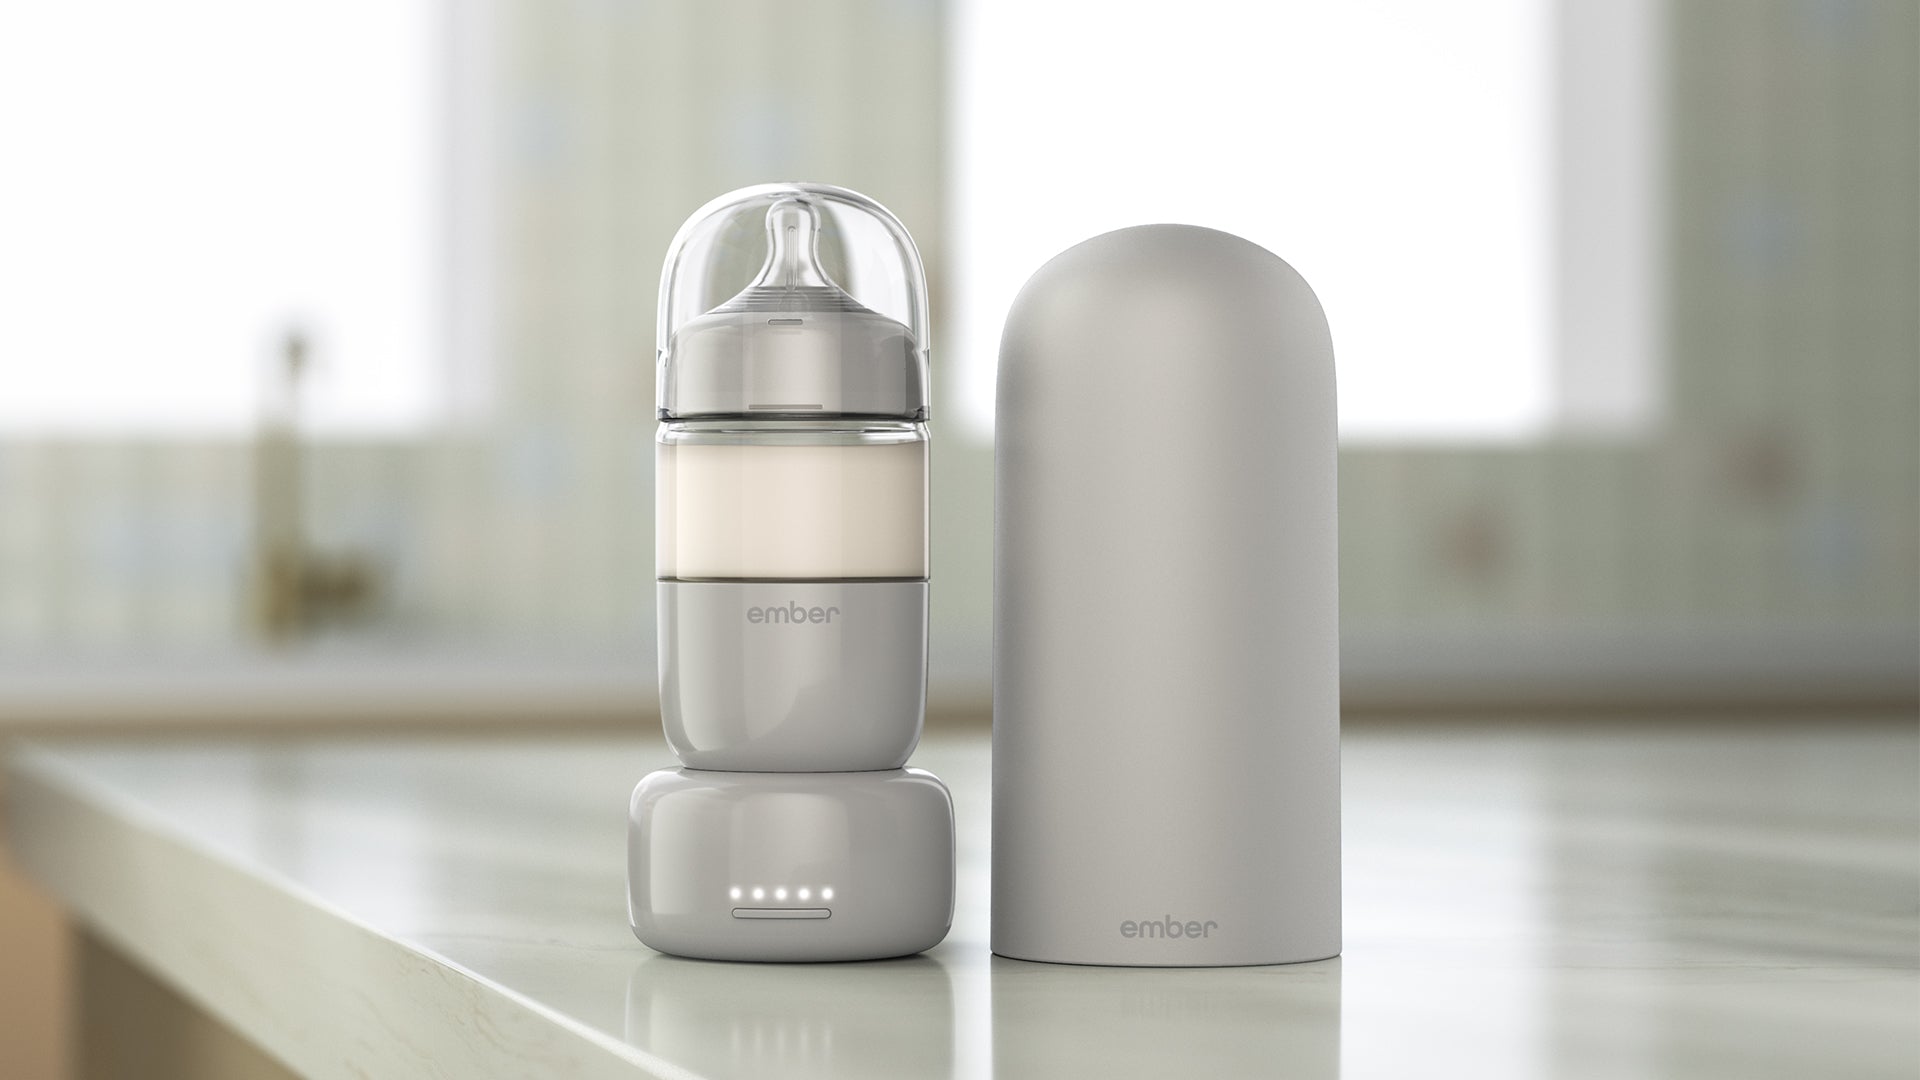 Ember Baby Bottle System Plus Review (2023): Nice but Wildly Expensive